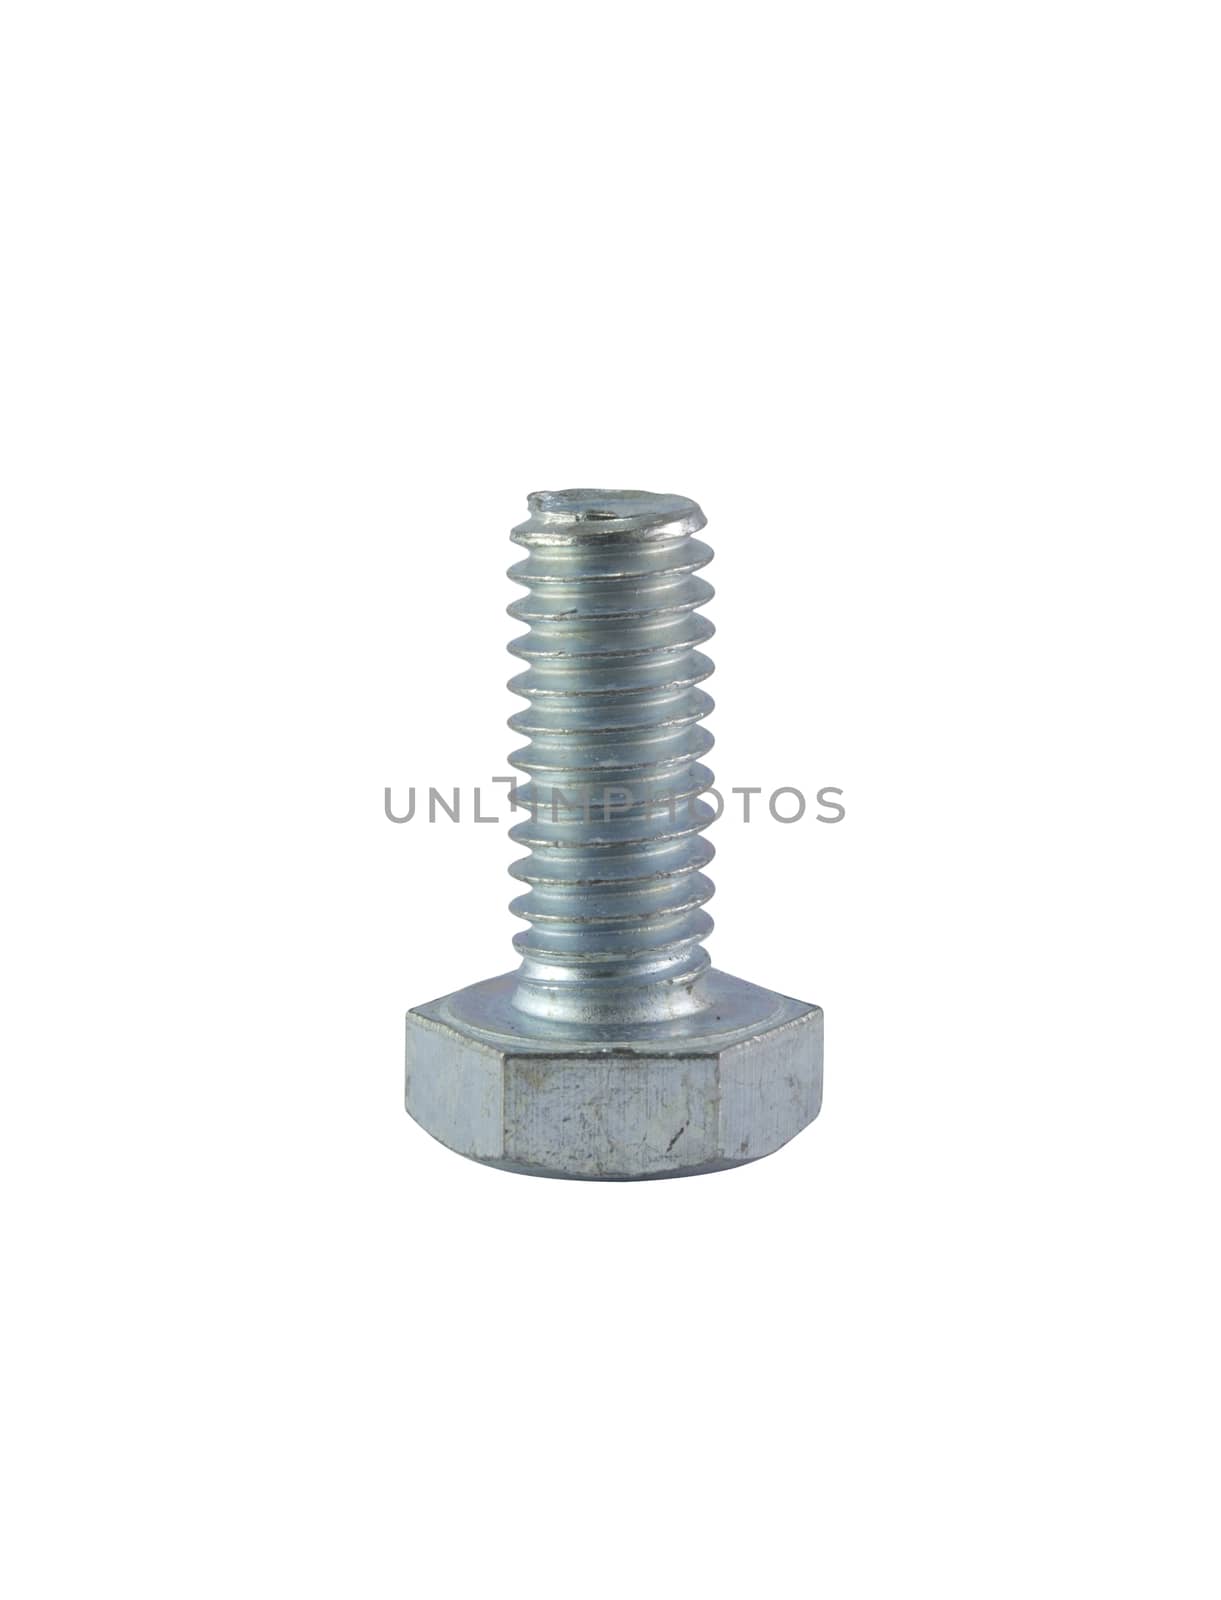 Stainless steel bolt on white background, close up